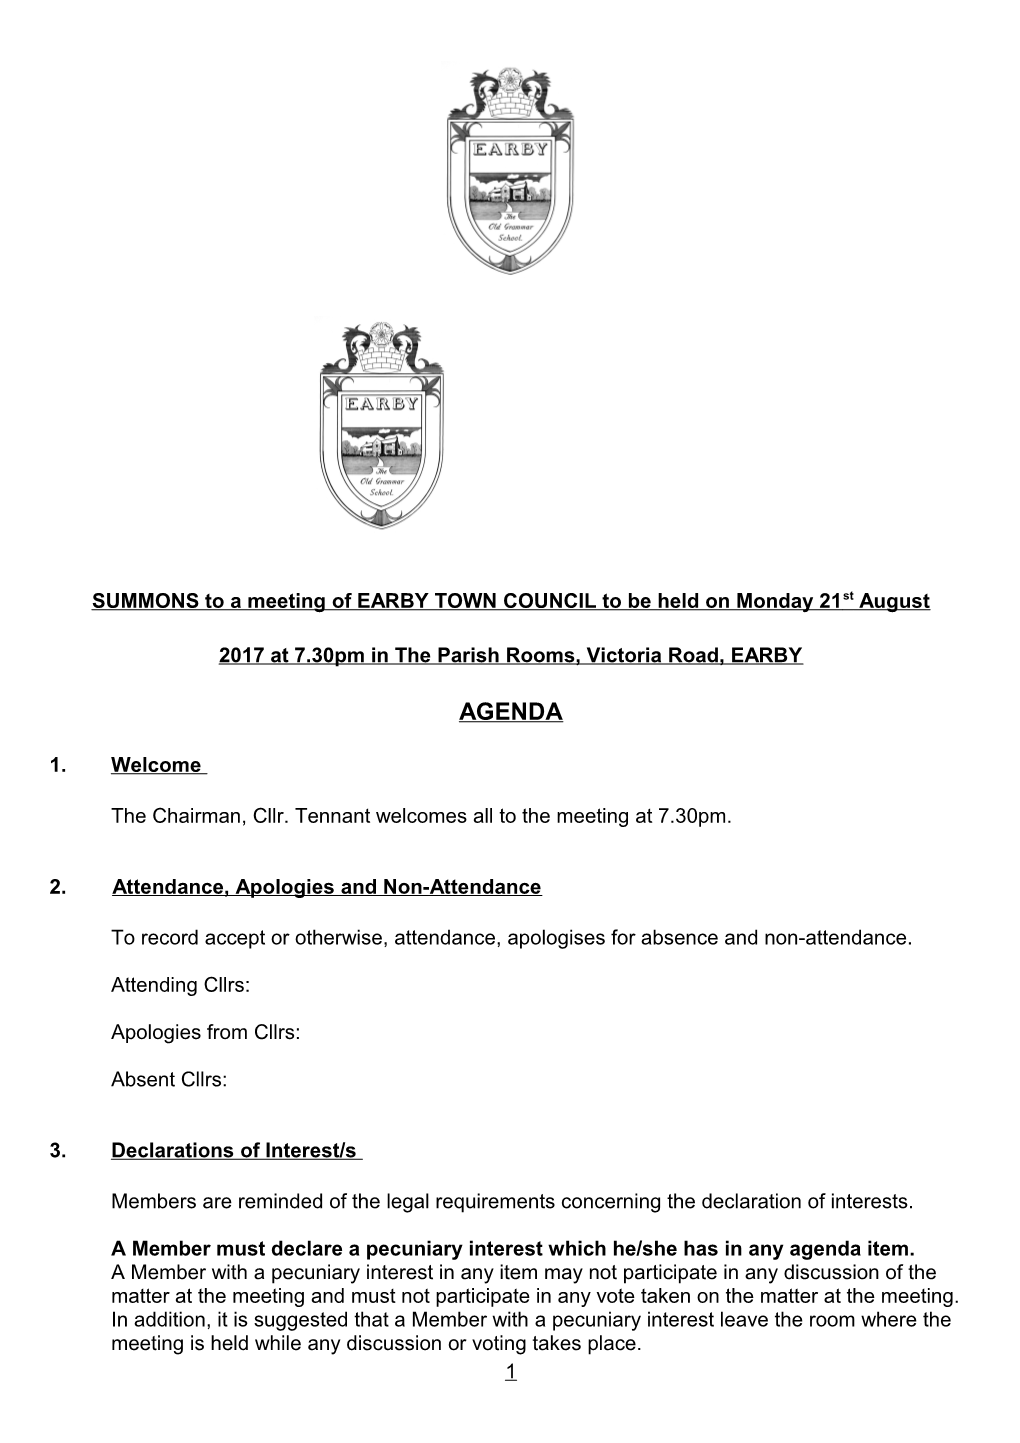 SUMMONS to a Meeting of EARBY TOWN COUNCIL to Be Held on Monday 21St August